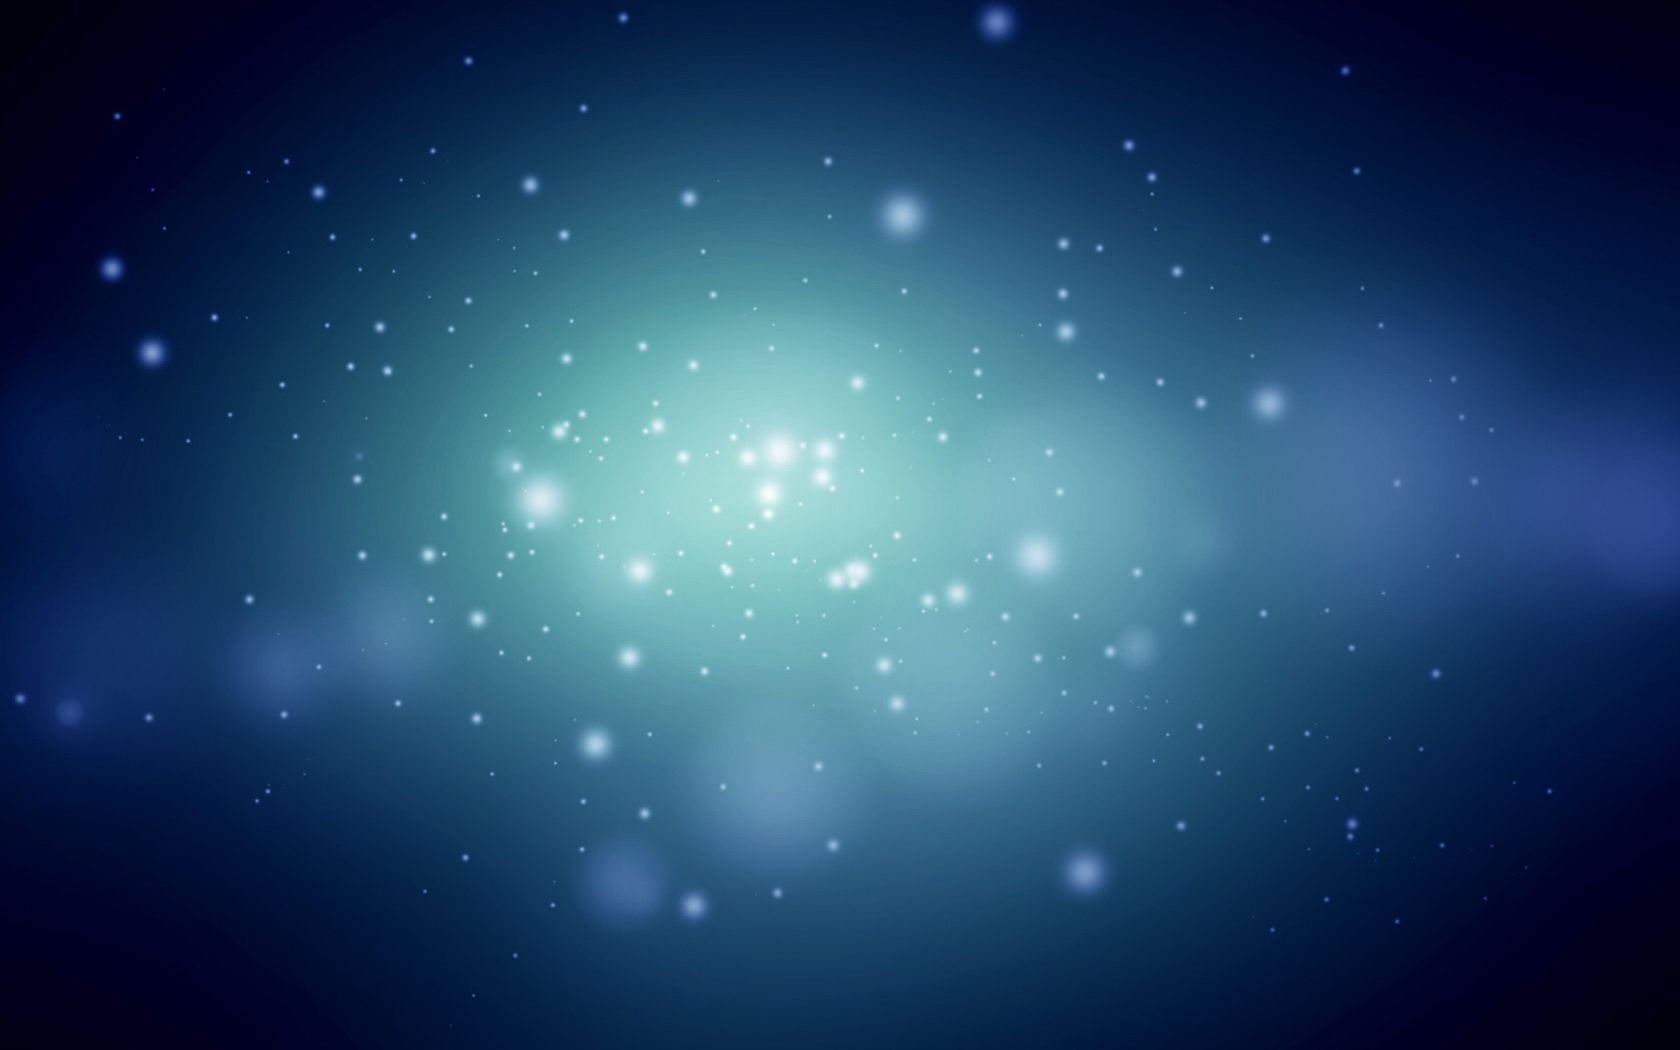 Free Stars And Galaxy Backgrounds For PowerPoint - Science PPT ...